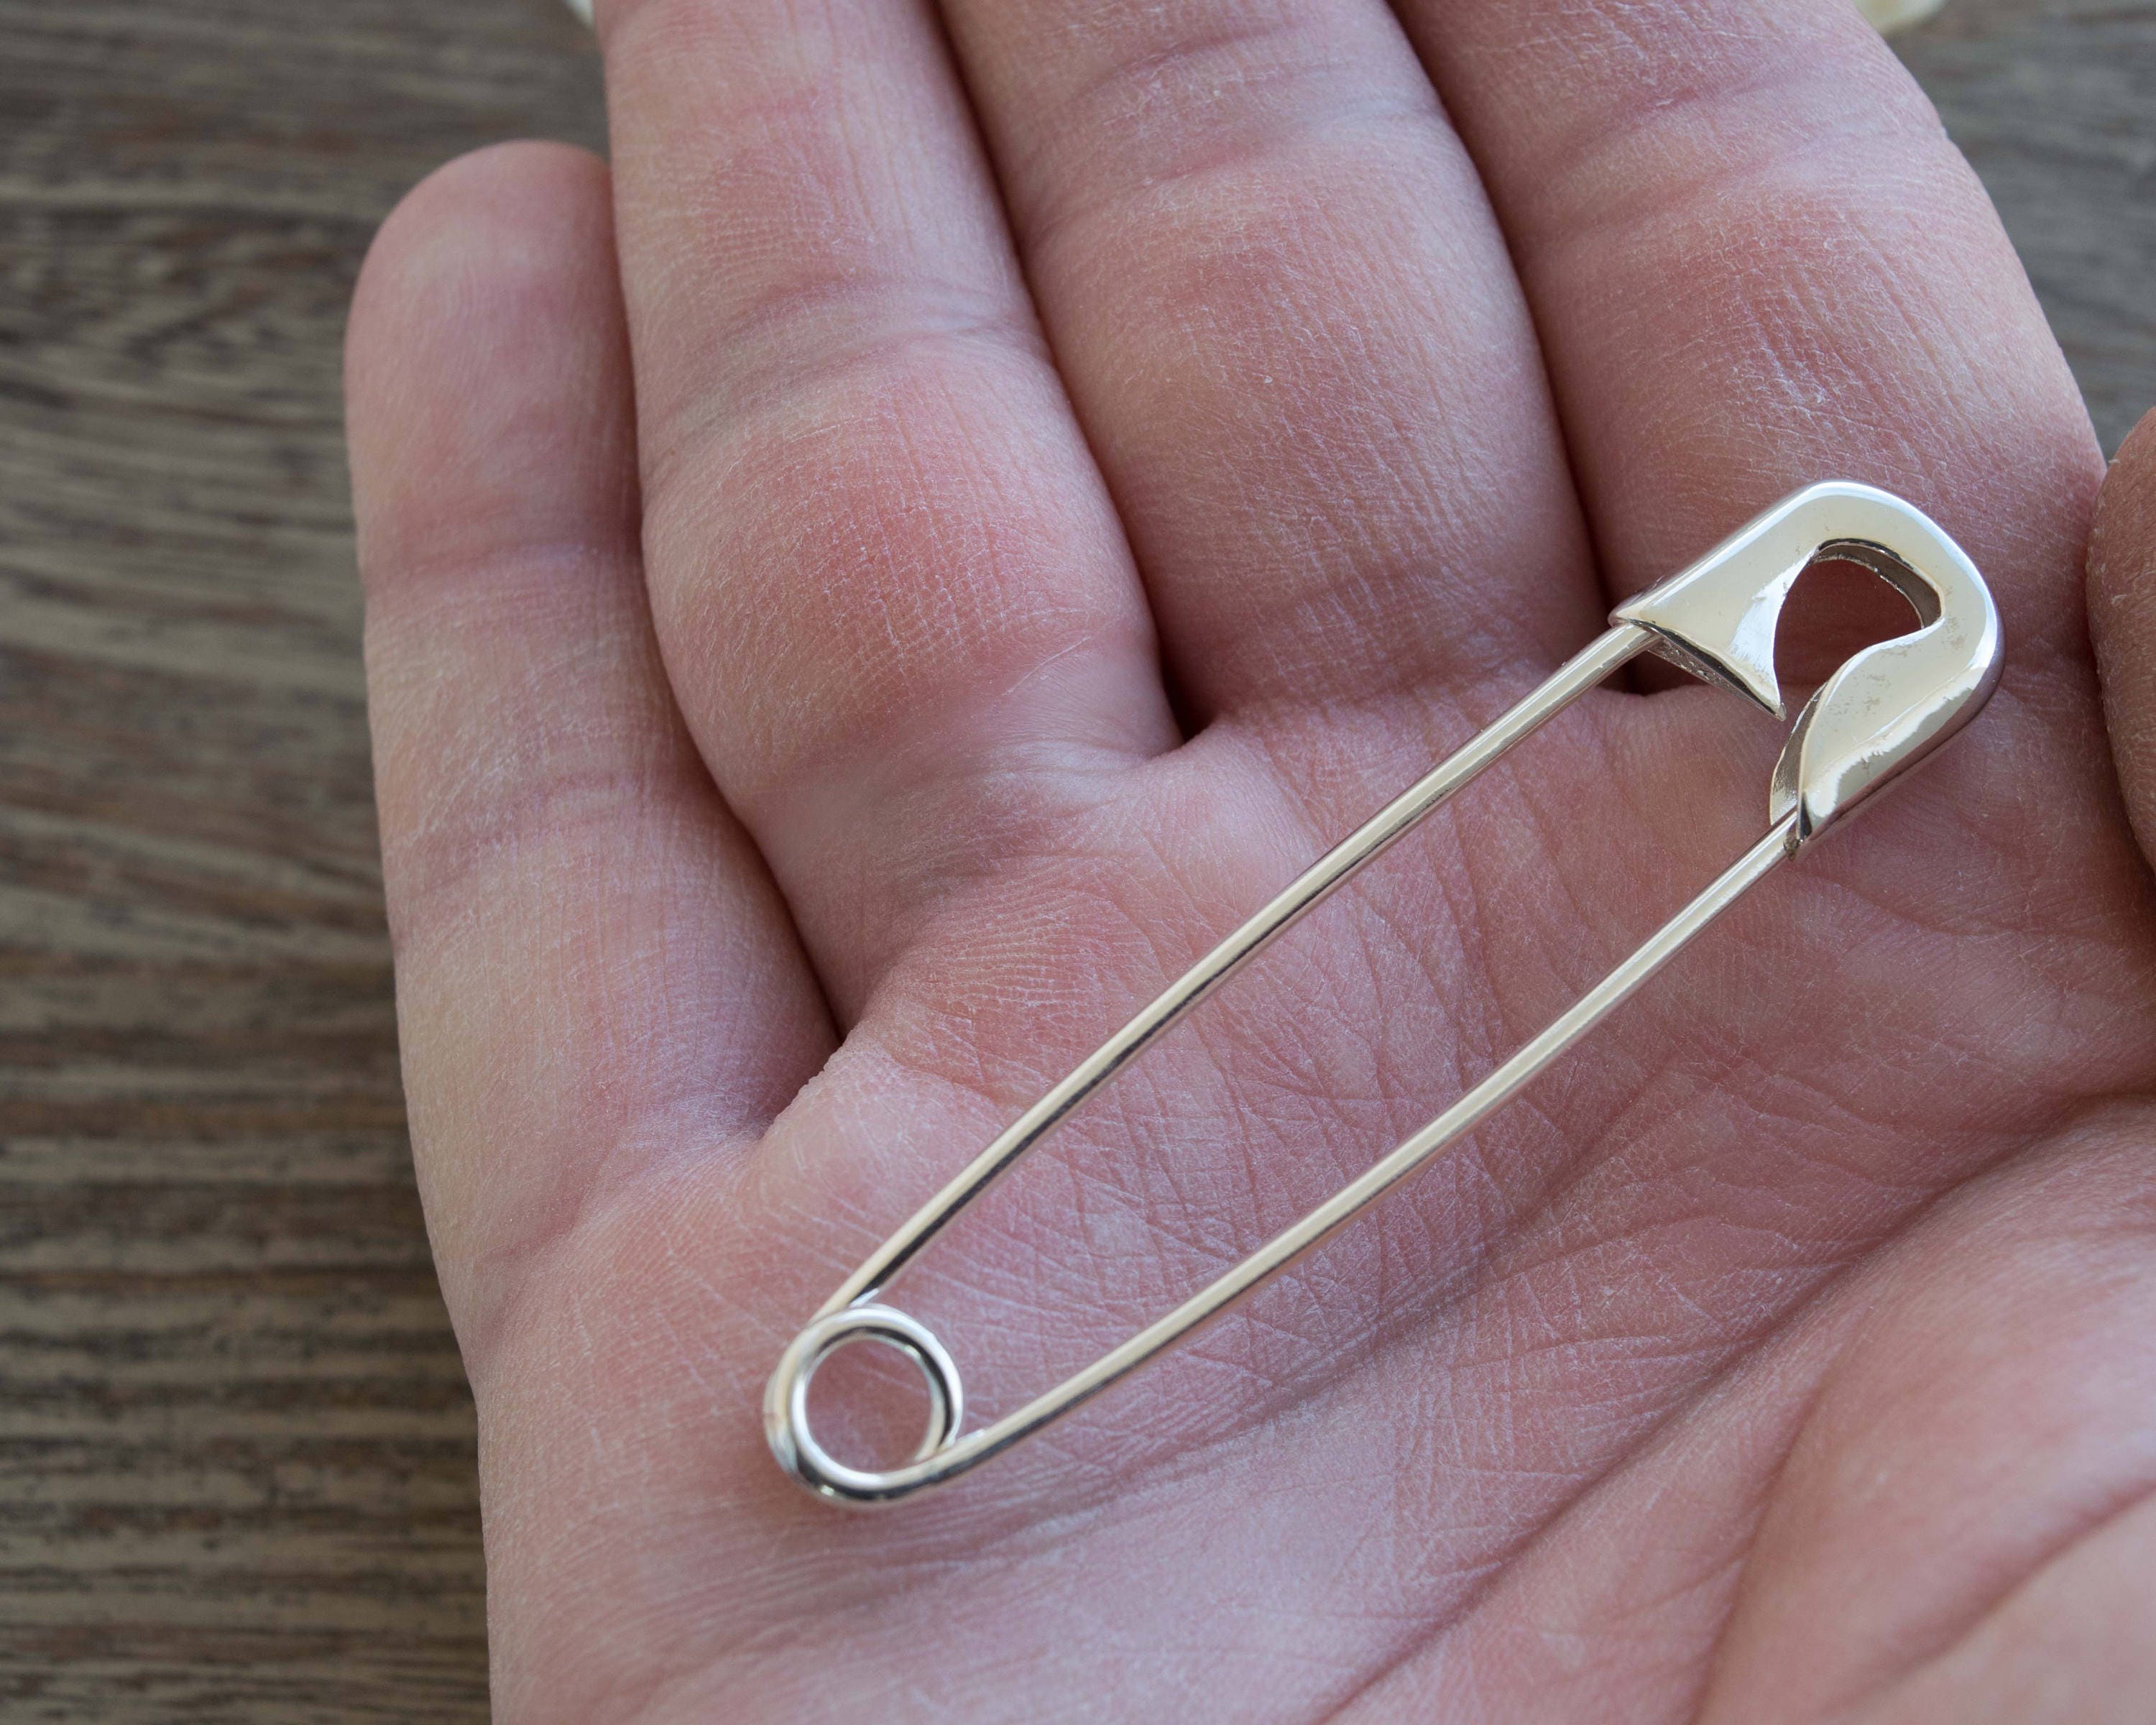 200 High Quality Silver Safety Big Pins With Large Kilt Big Pin Size 60mm  From Jonystore, $31